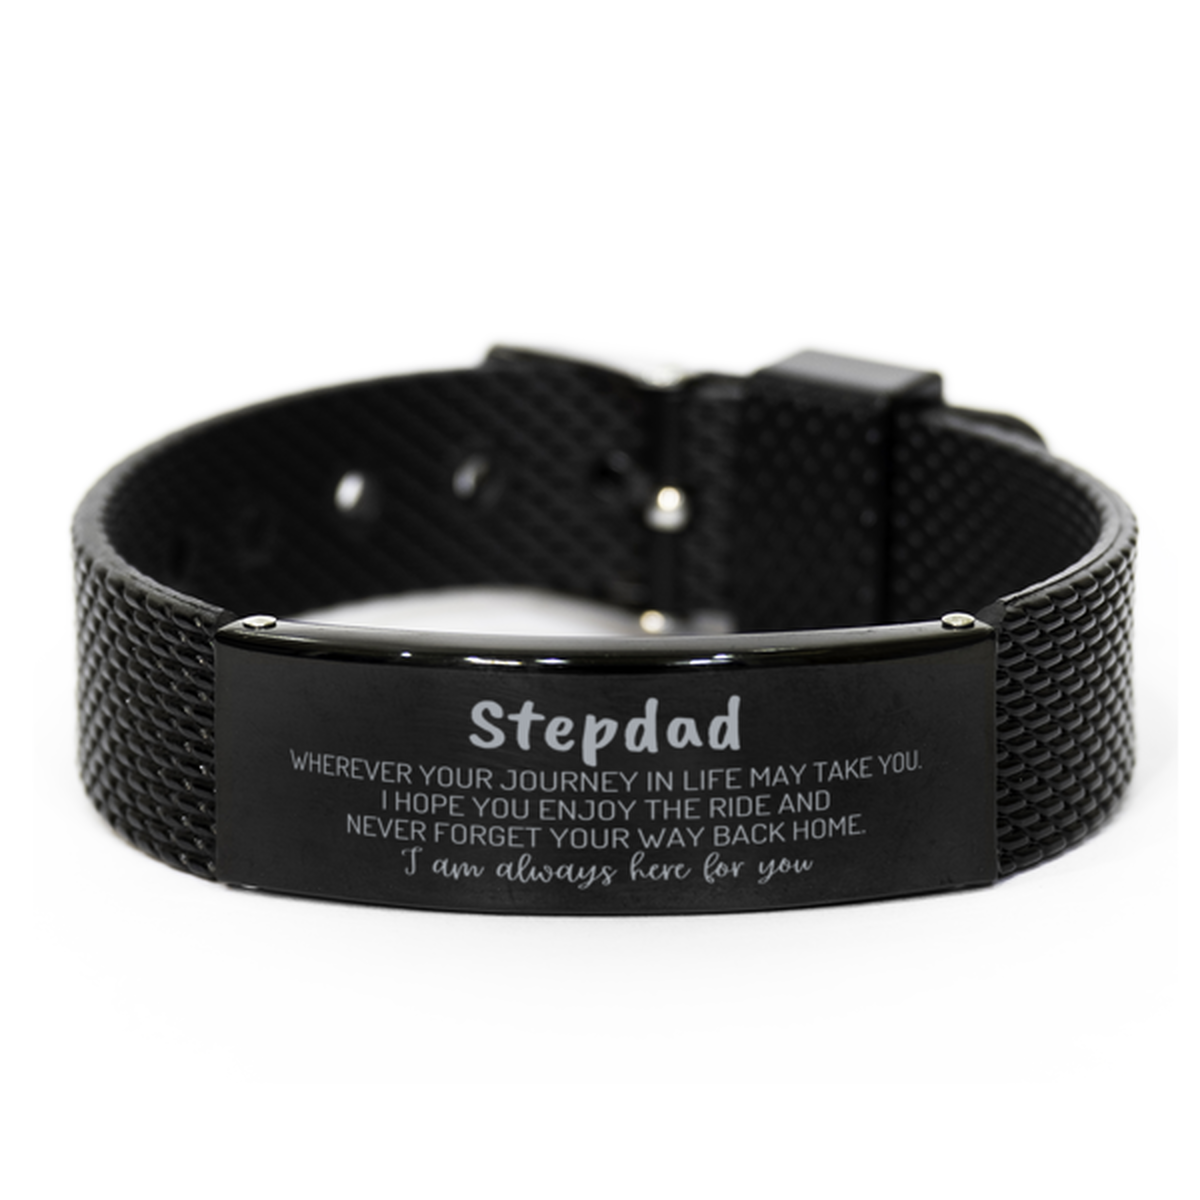 Stepdad wherever your journey in life may take you, I am always here for you Stepdad Black Shark Mesh Bracelet, Awesome Christmas Gifts For Stepdad, Stepdad Birthday Gifts for Men Women Family Loved One